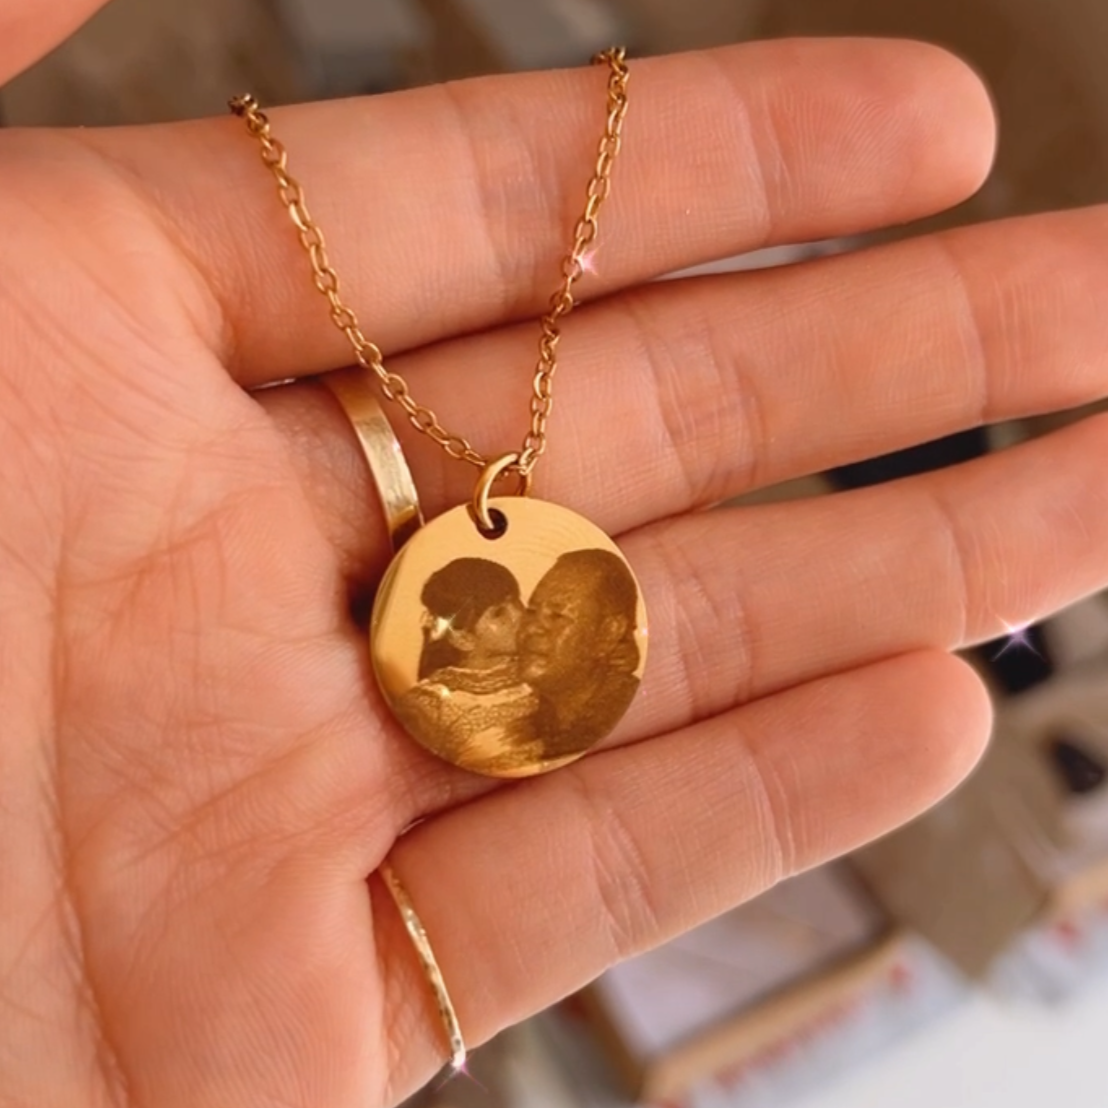 Double Sided Lazer Engraved 20MM Disc Necklace - ACTUAL PHOTO